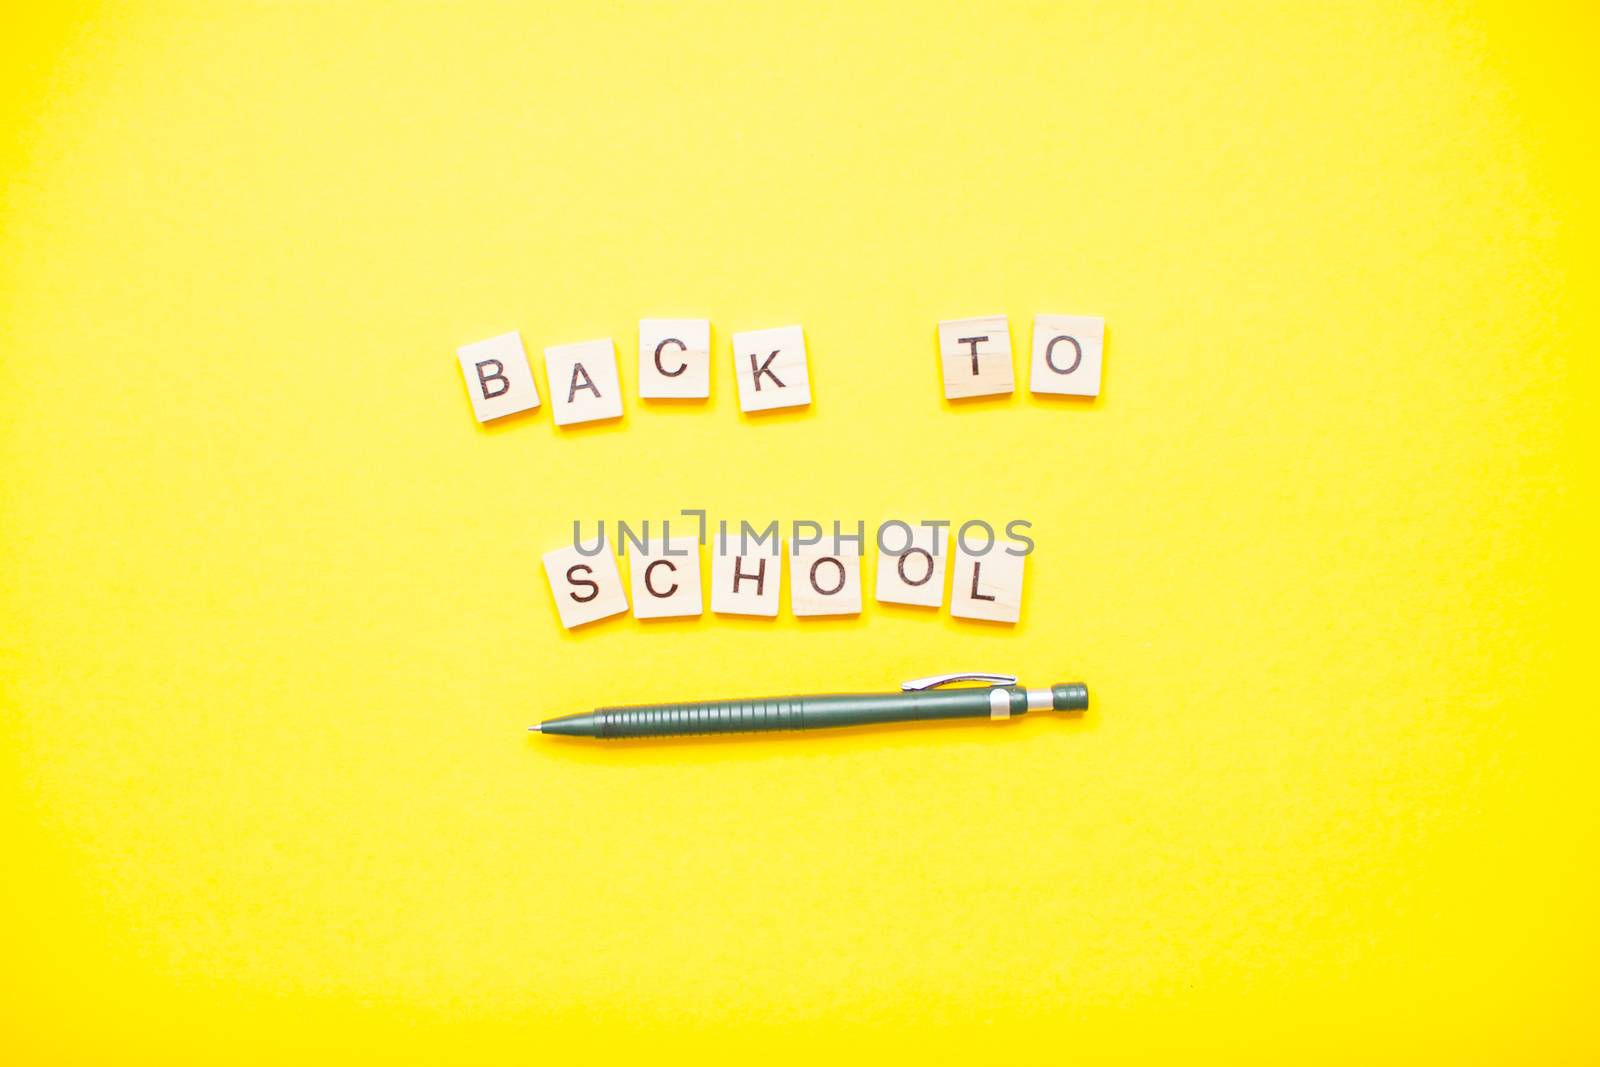 Words from wooden blocks "back to school" and stationery on bright yellow background